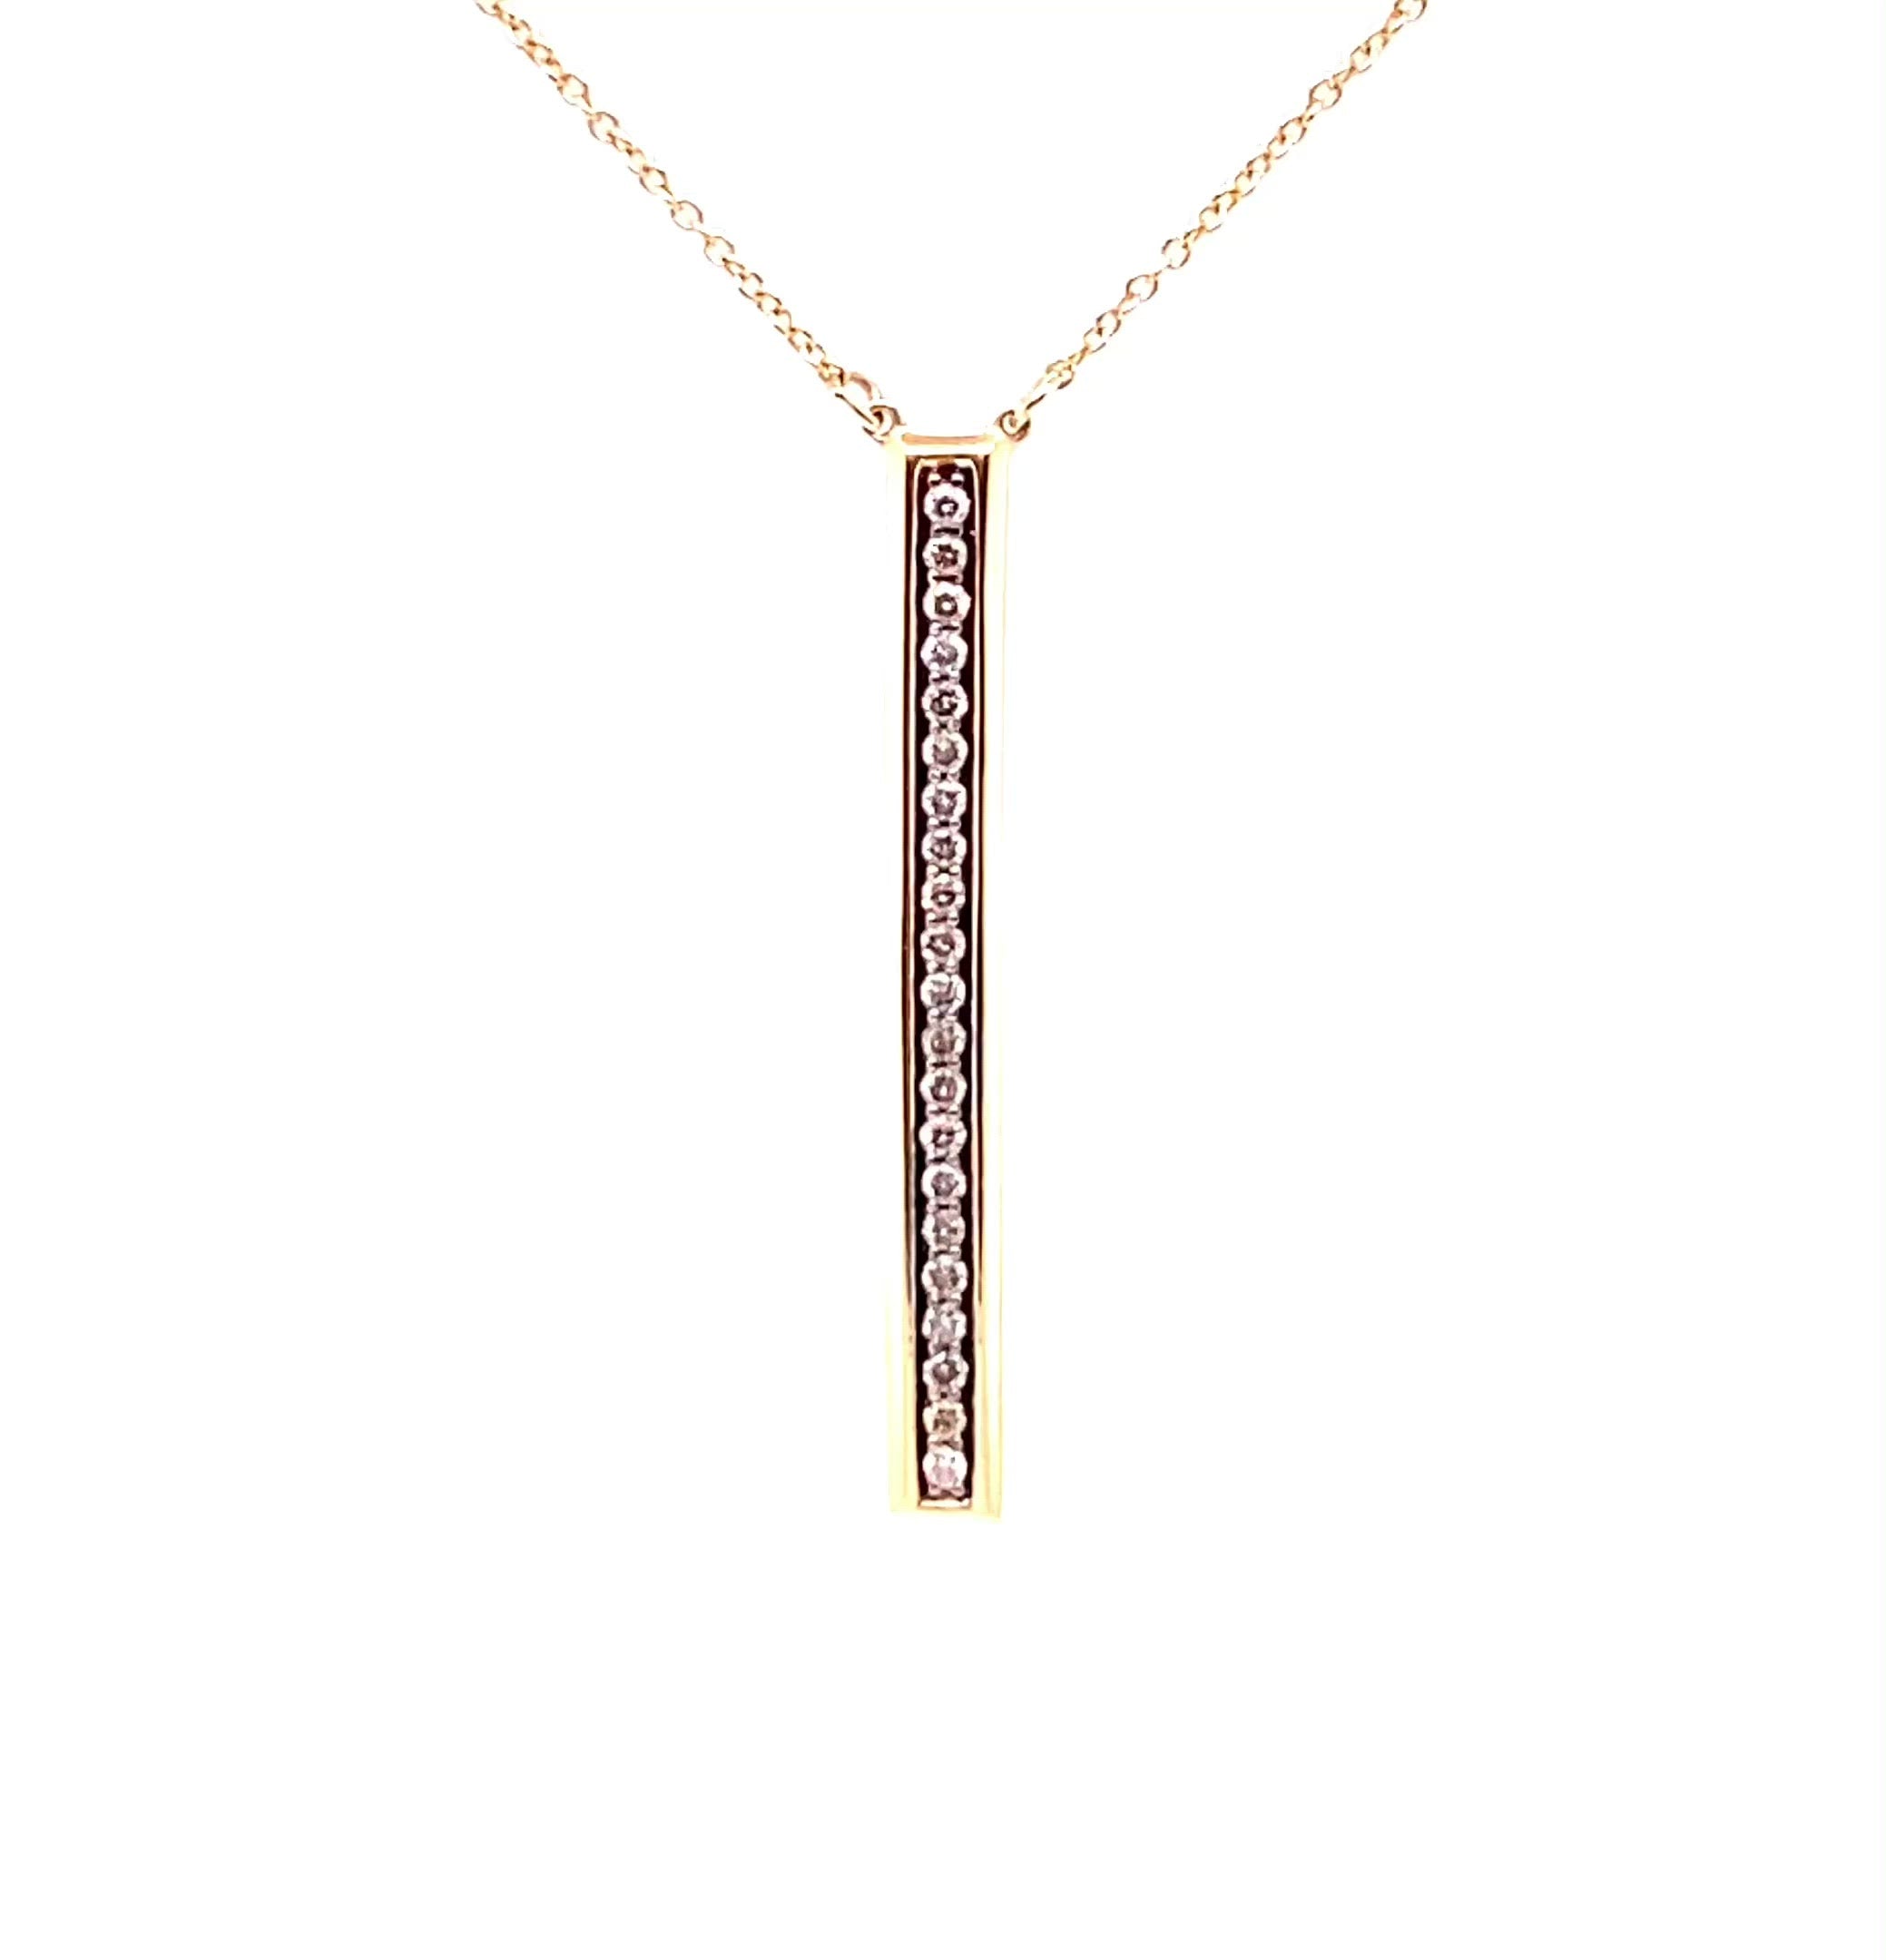 LeVian Natural Chocolate Diamond Necklace 14K Solid Gold .33tcw Bar Pendant Designer Necklace Fine Jewelry Women's Necklace Estate Jewelry